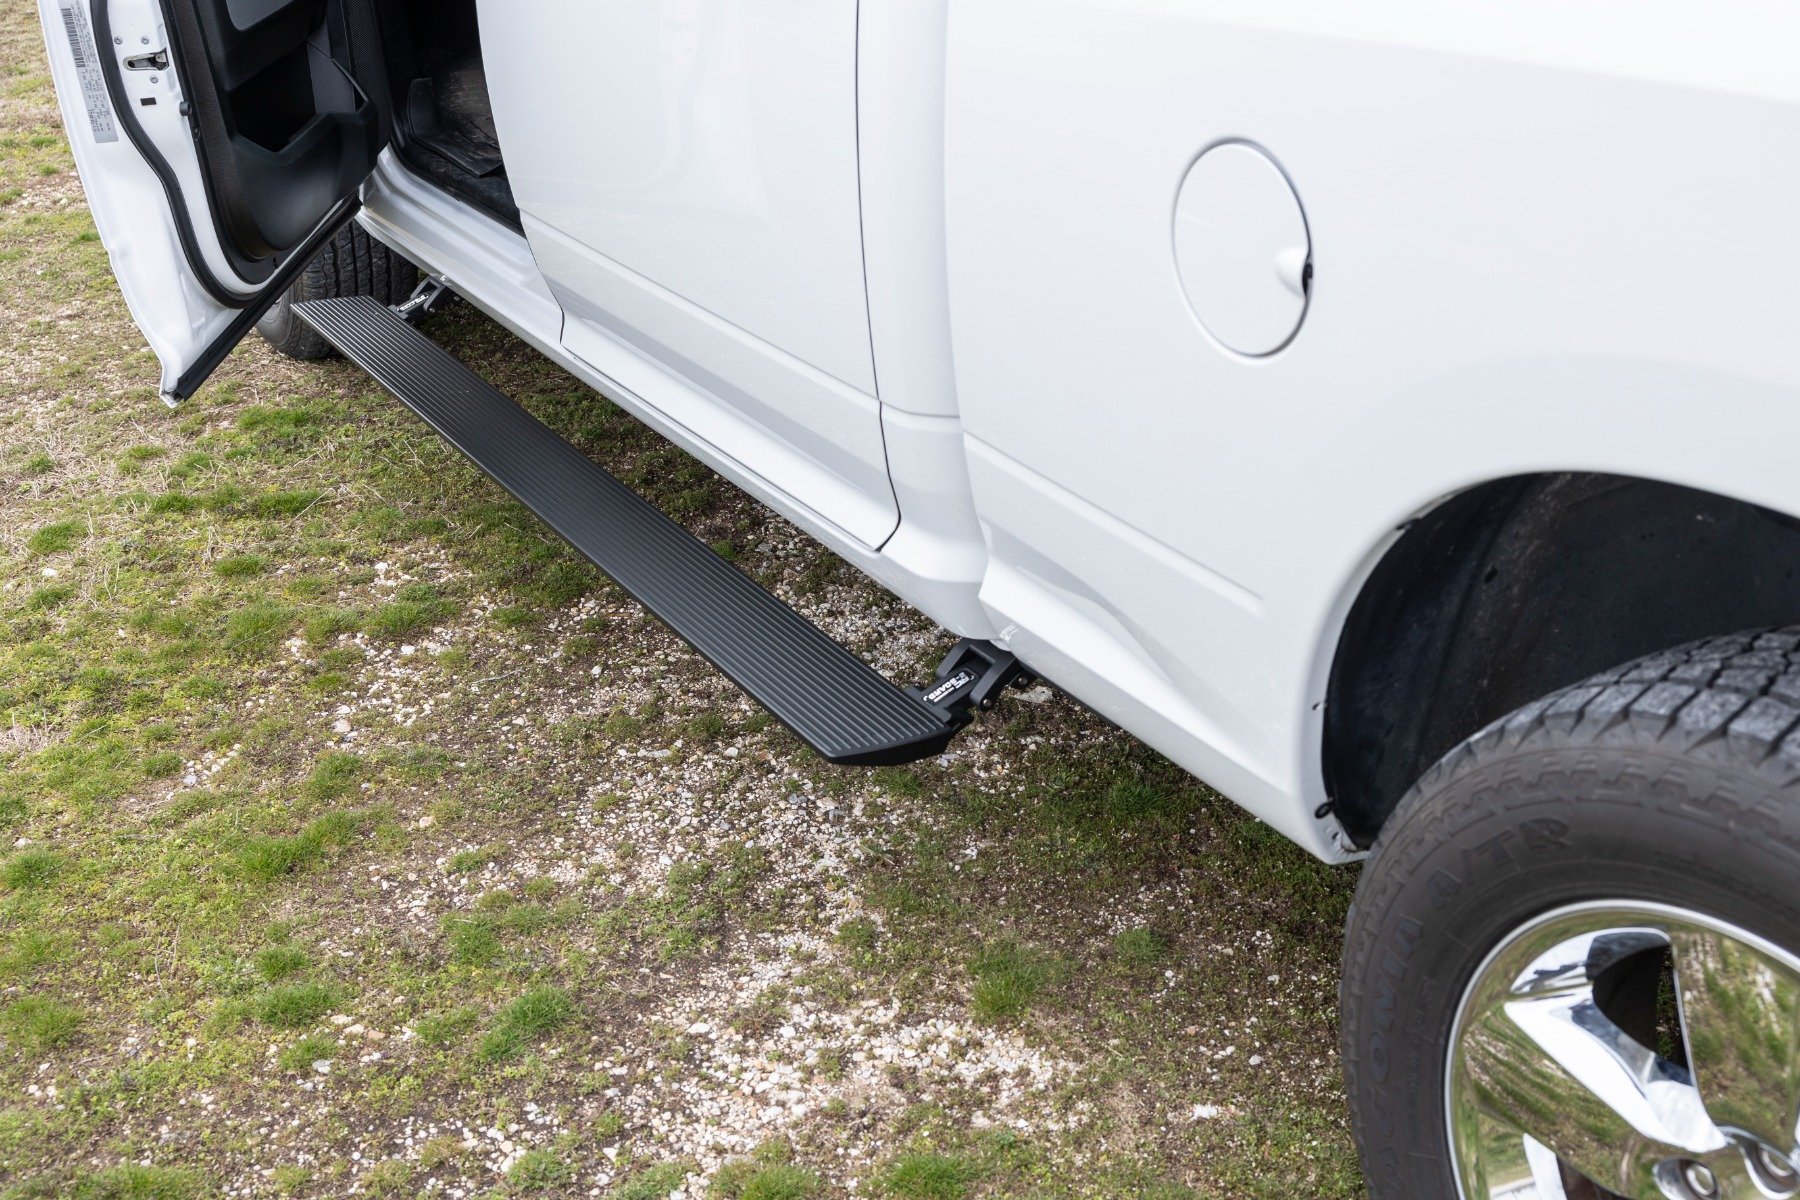 Upgrade your ride with 2021 Dodge Ram 1500 running boards.